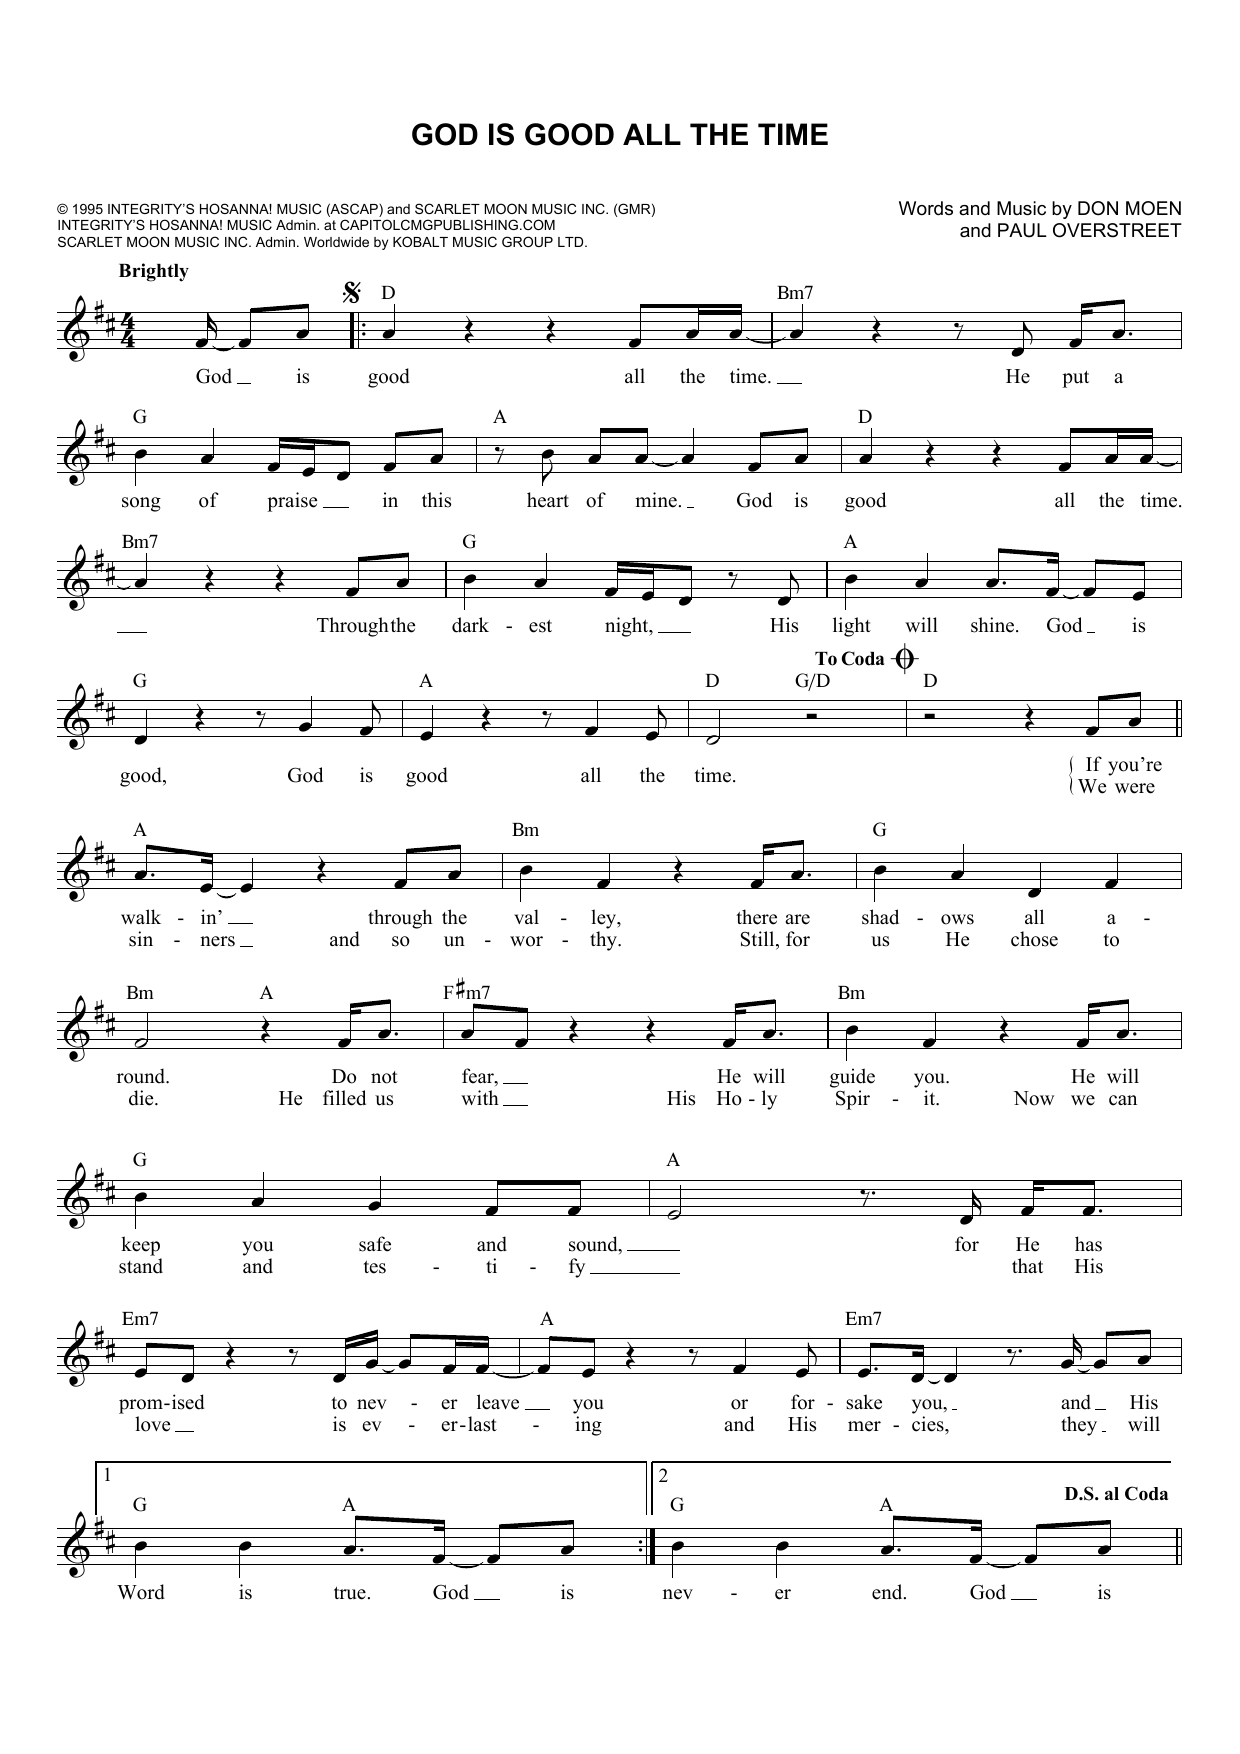 Download Don Moen God Is Good All The Time Sheet Music